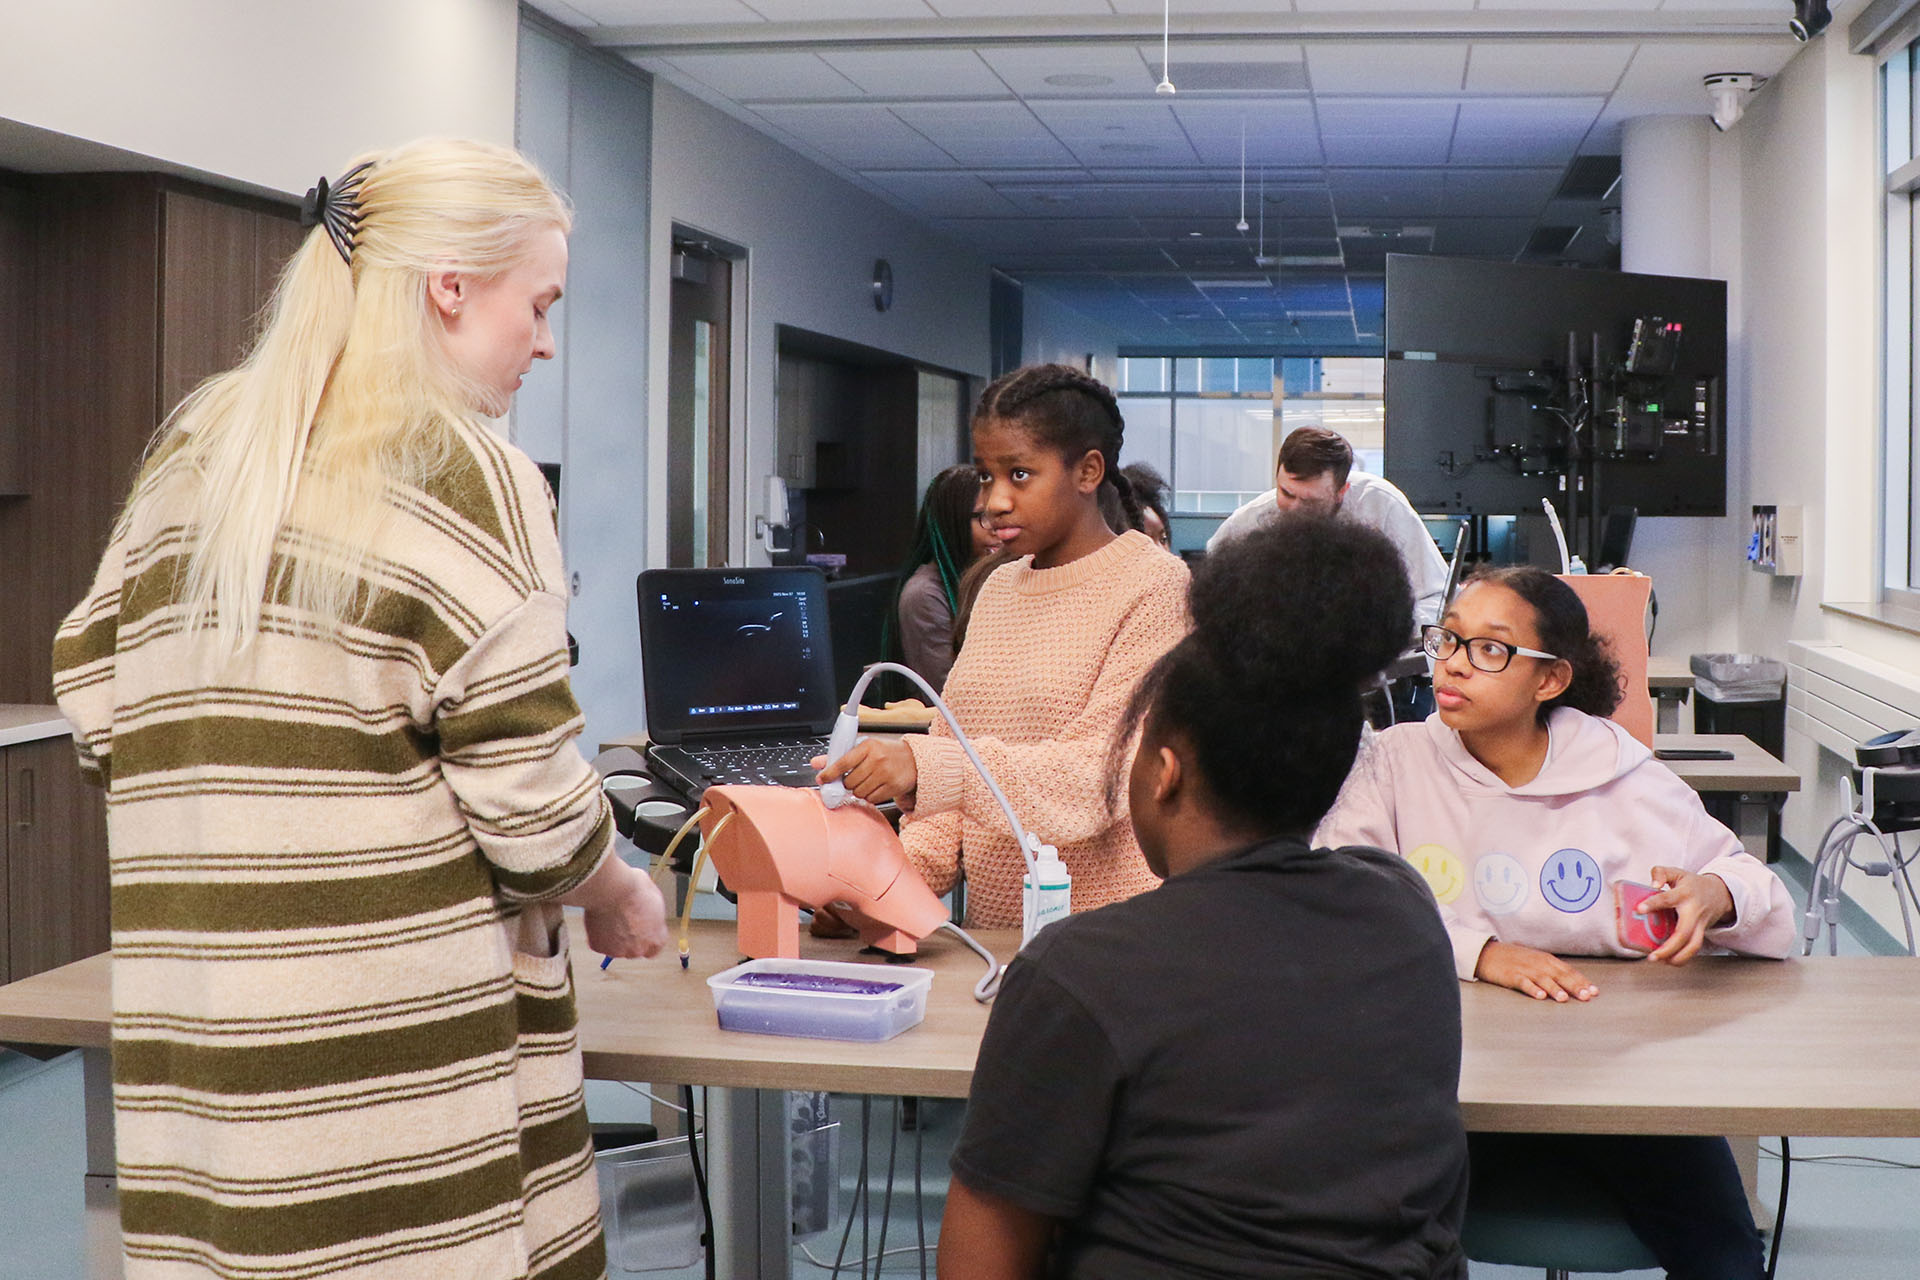 Radiology resident Liz Pruss&comma; MD&comma; left&comma; served as a teacher and role model for visiting teenagers during a recent "Rad Girls" experiential educational event put on by the UNMC College of Medicine&apos;s Radiology Interest Group&comma; UNMC&apos;s iEXCEL program and Girls Inc&period; Omaha&period;